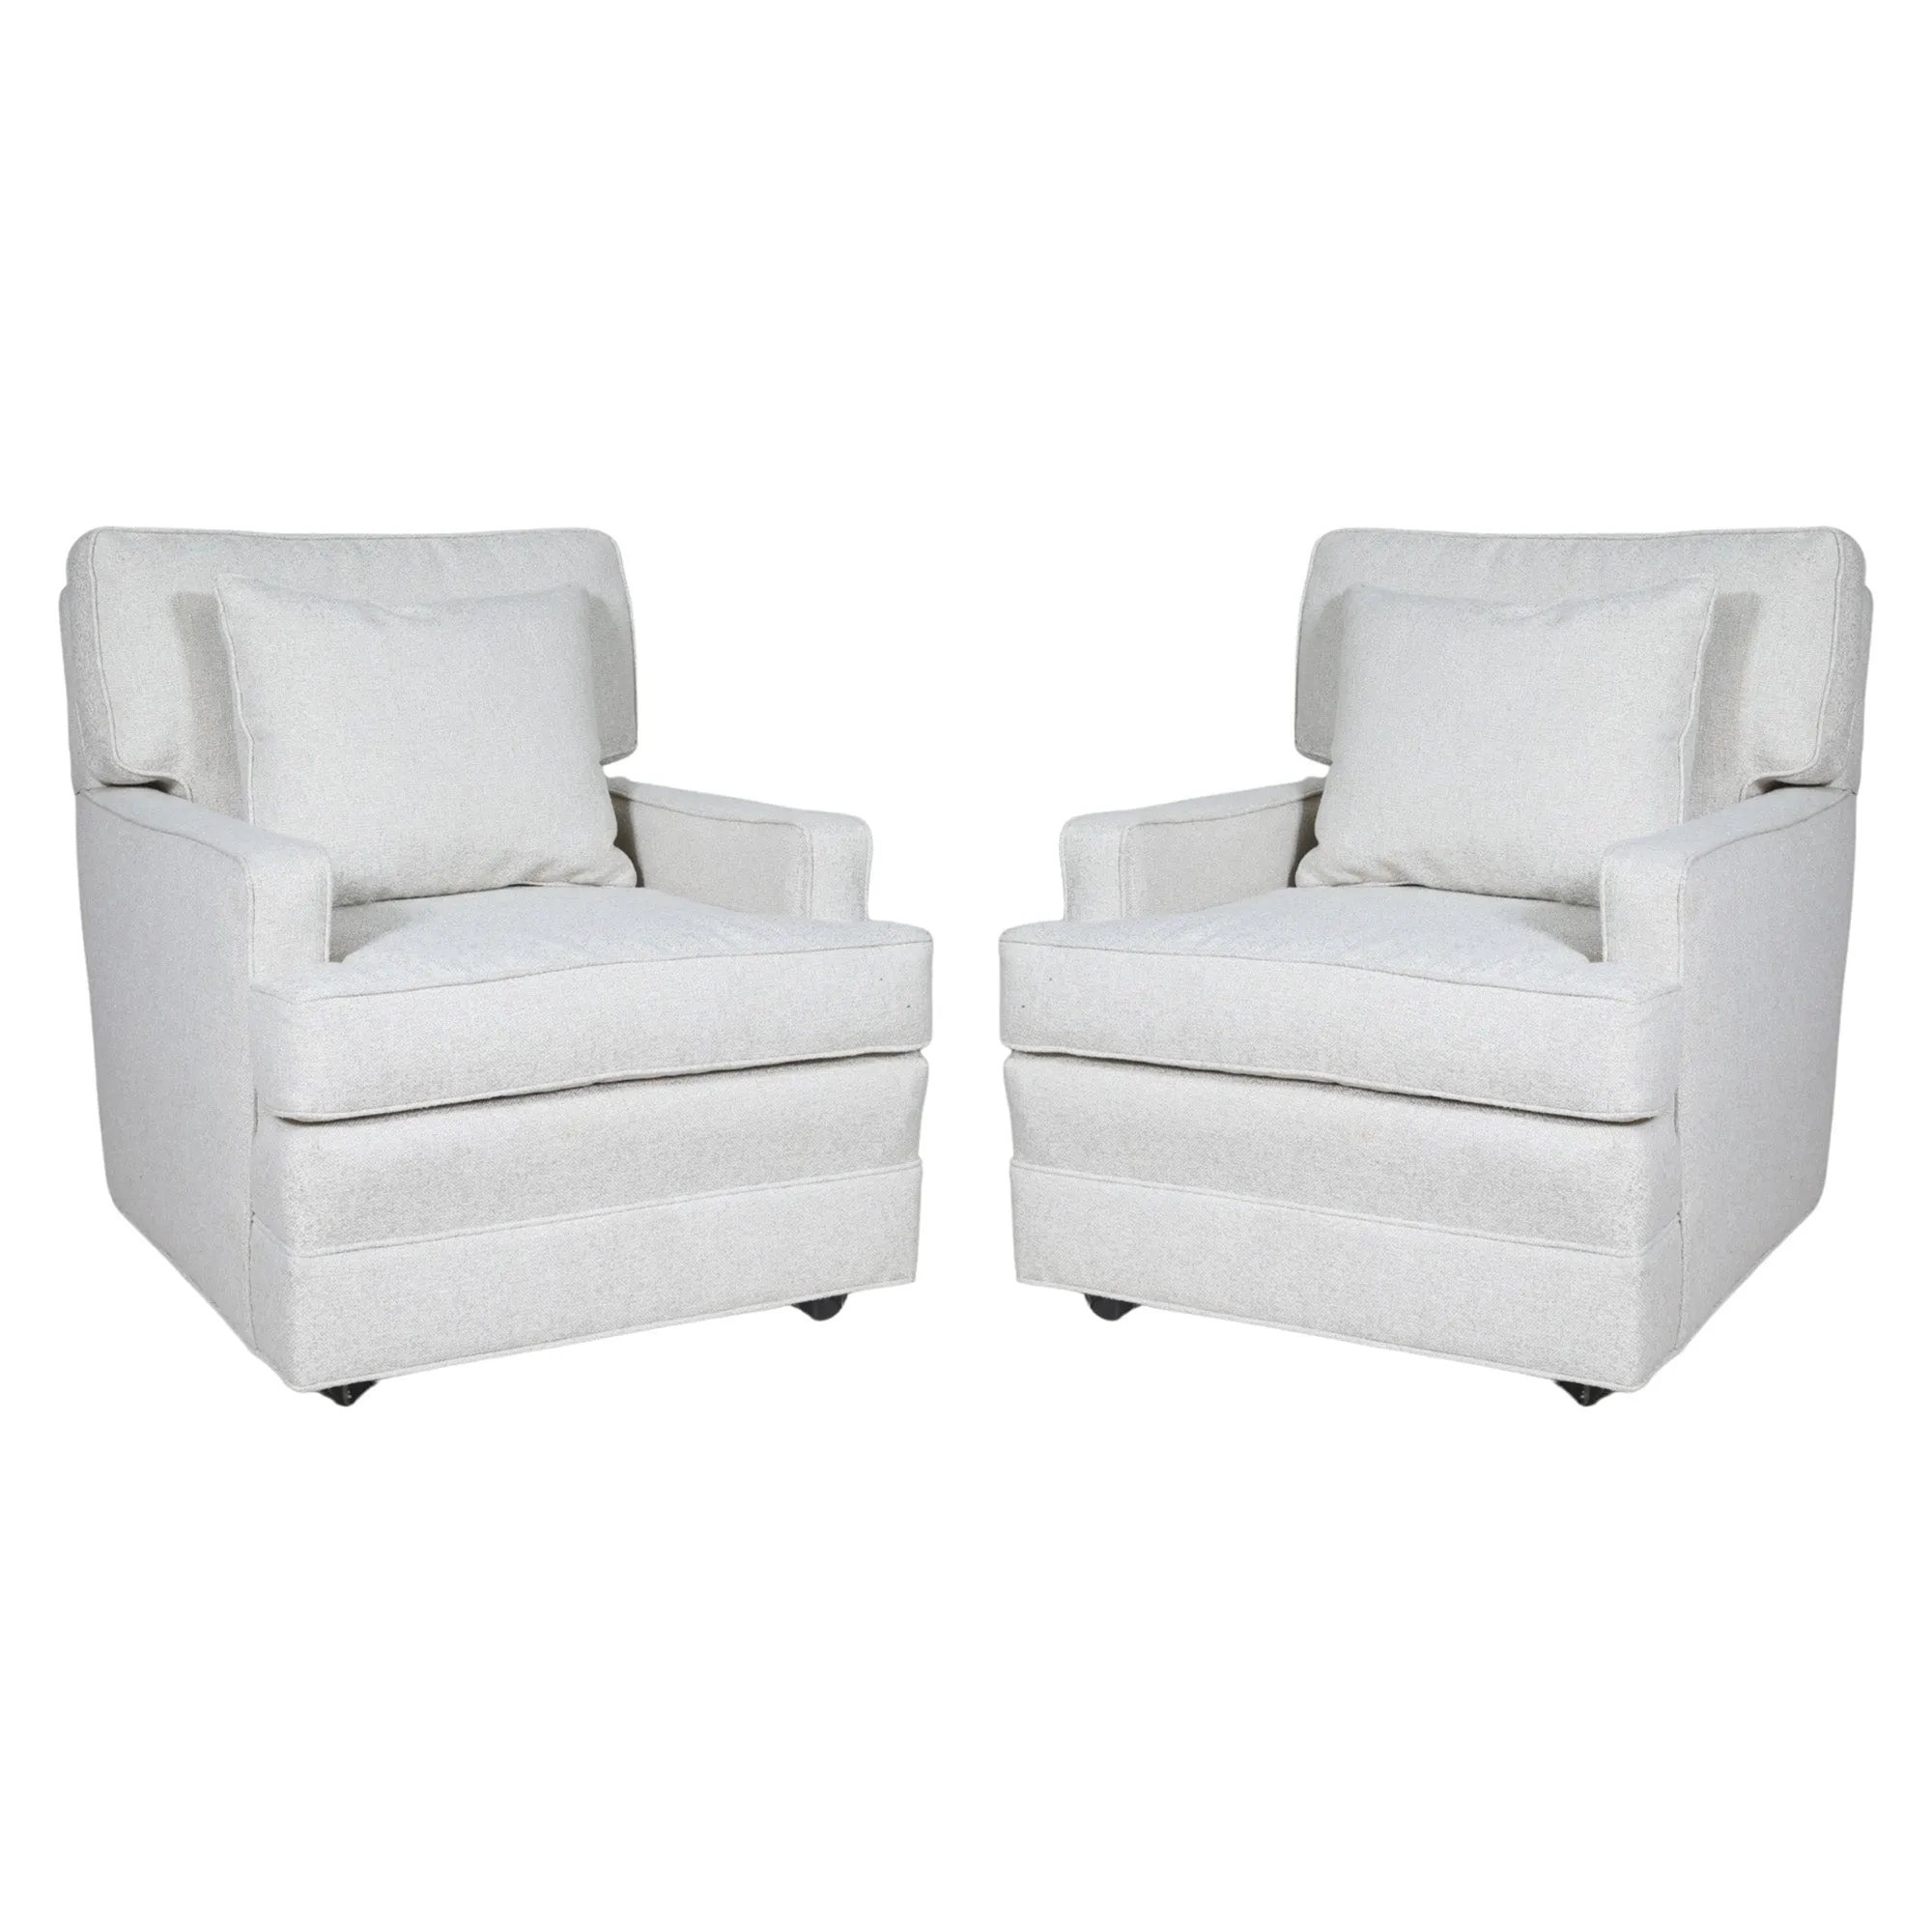 Pair of Club Chairs in Claudeth Beige Woven Fabric